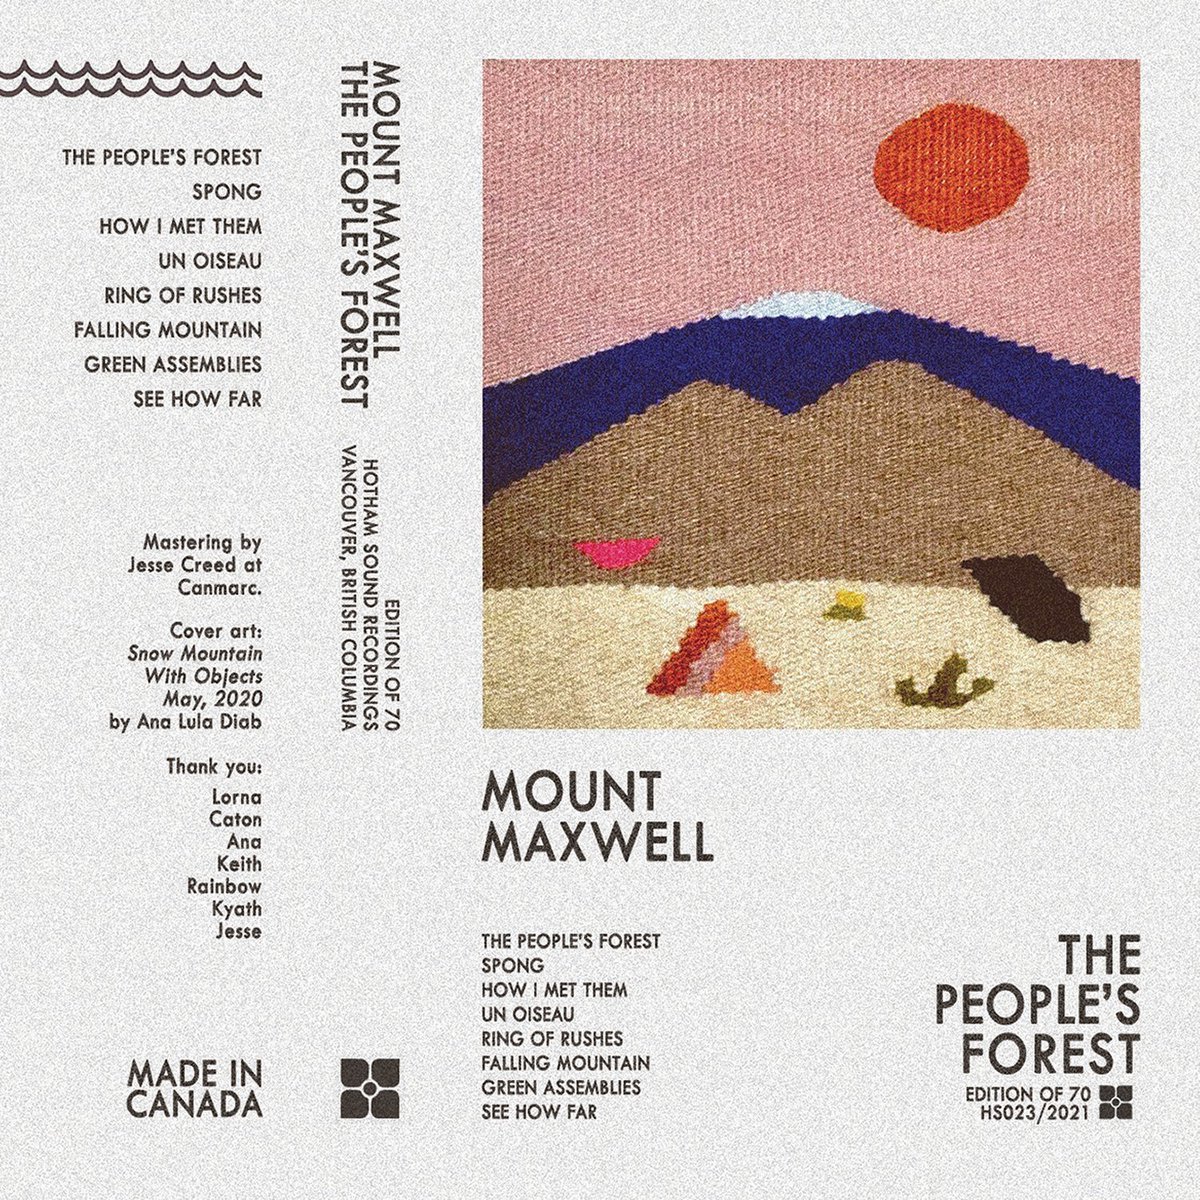 #NowPlaying #HeadphoneListening Mount Maxwell - The People's Forest from 2021 on Hotham Sound